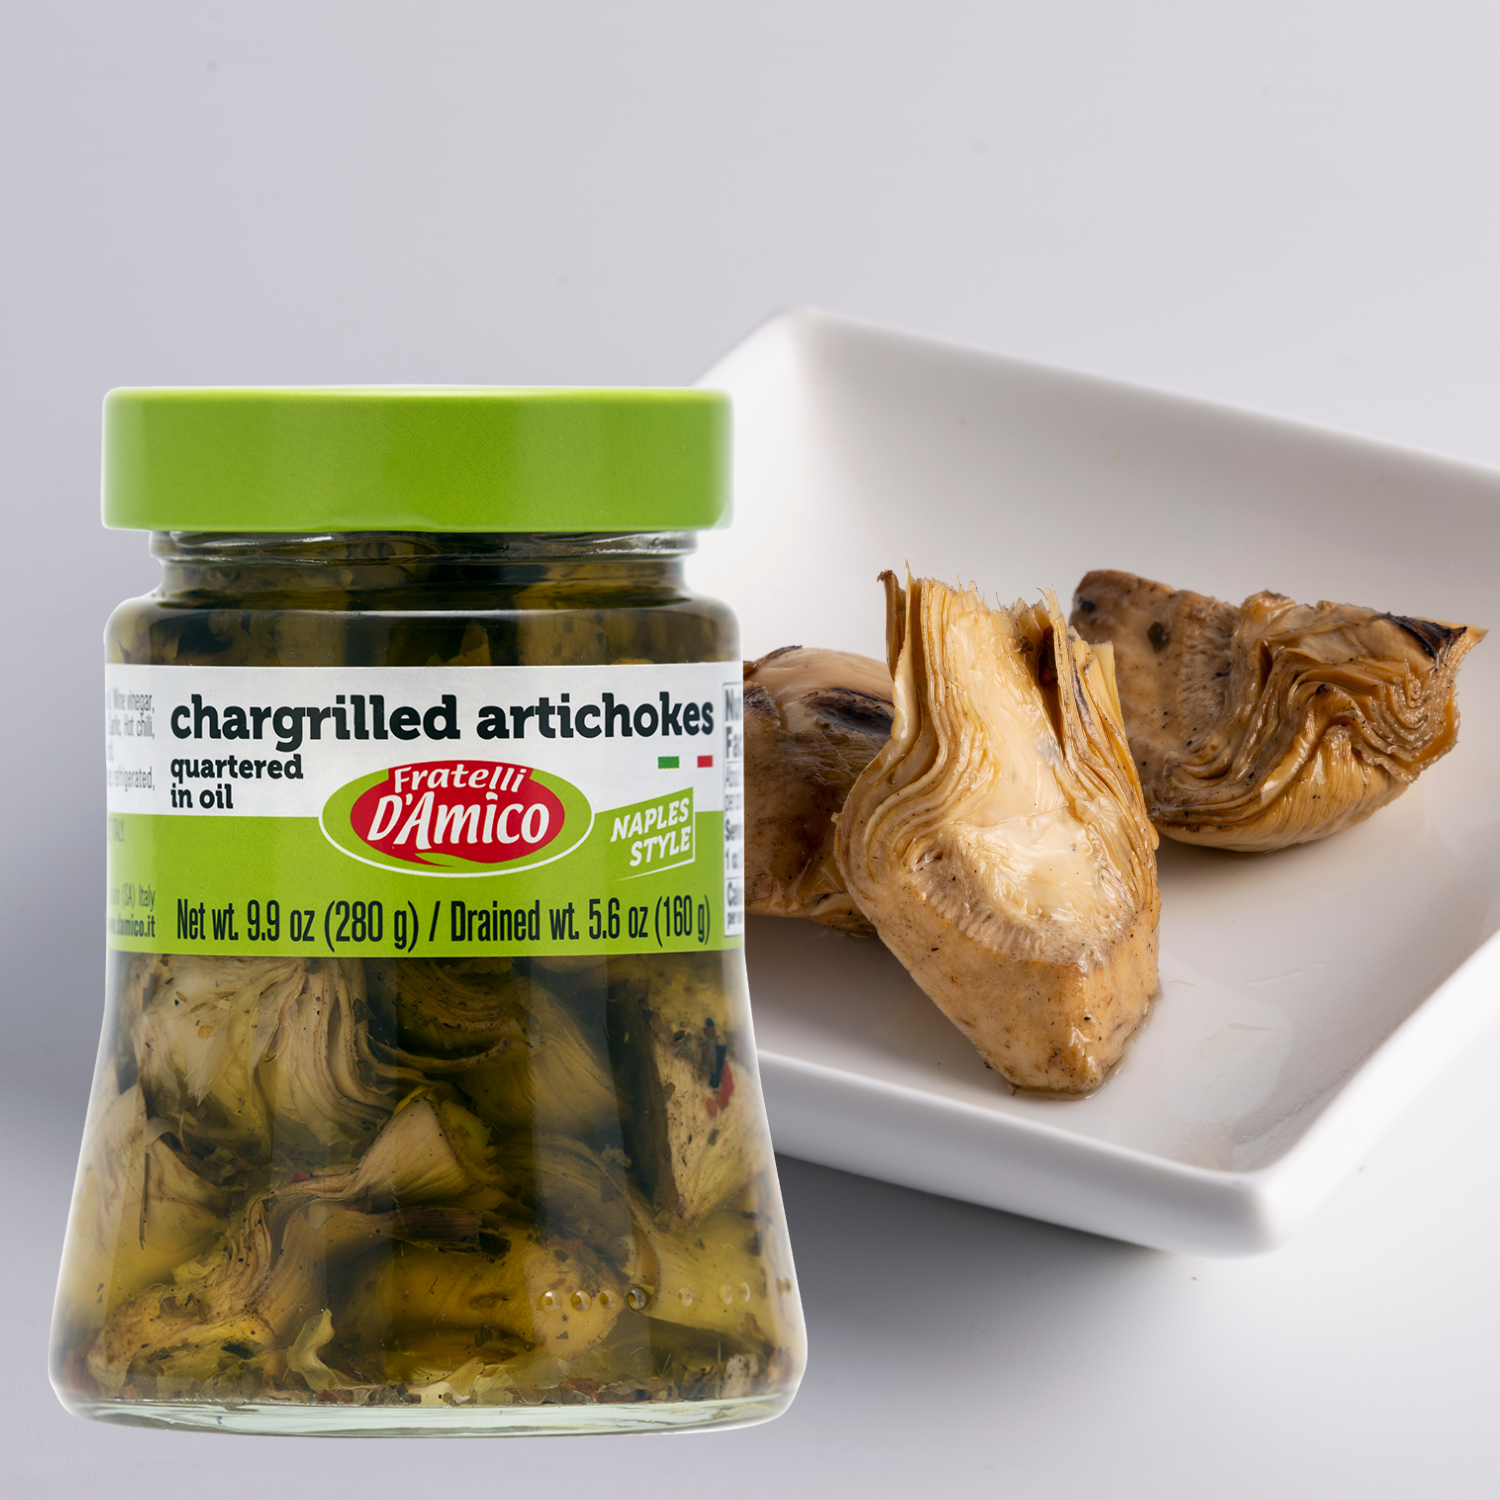 Fratelli D'Amico Chargrilled Artichokes Quartered in Oil. Net wt. 9.9oz (280g)